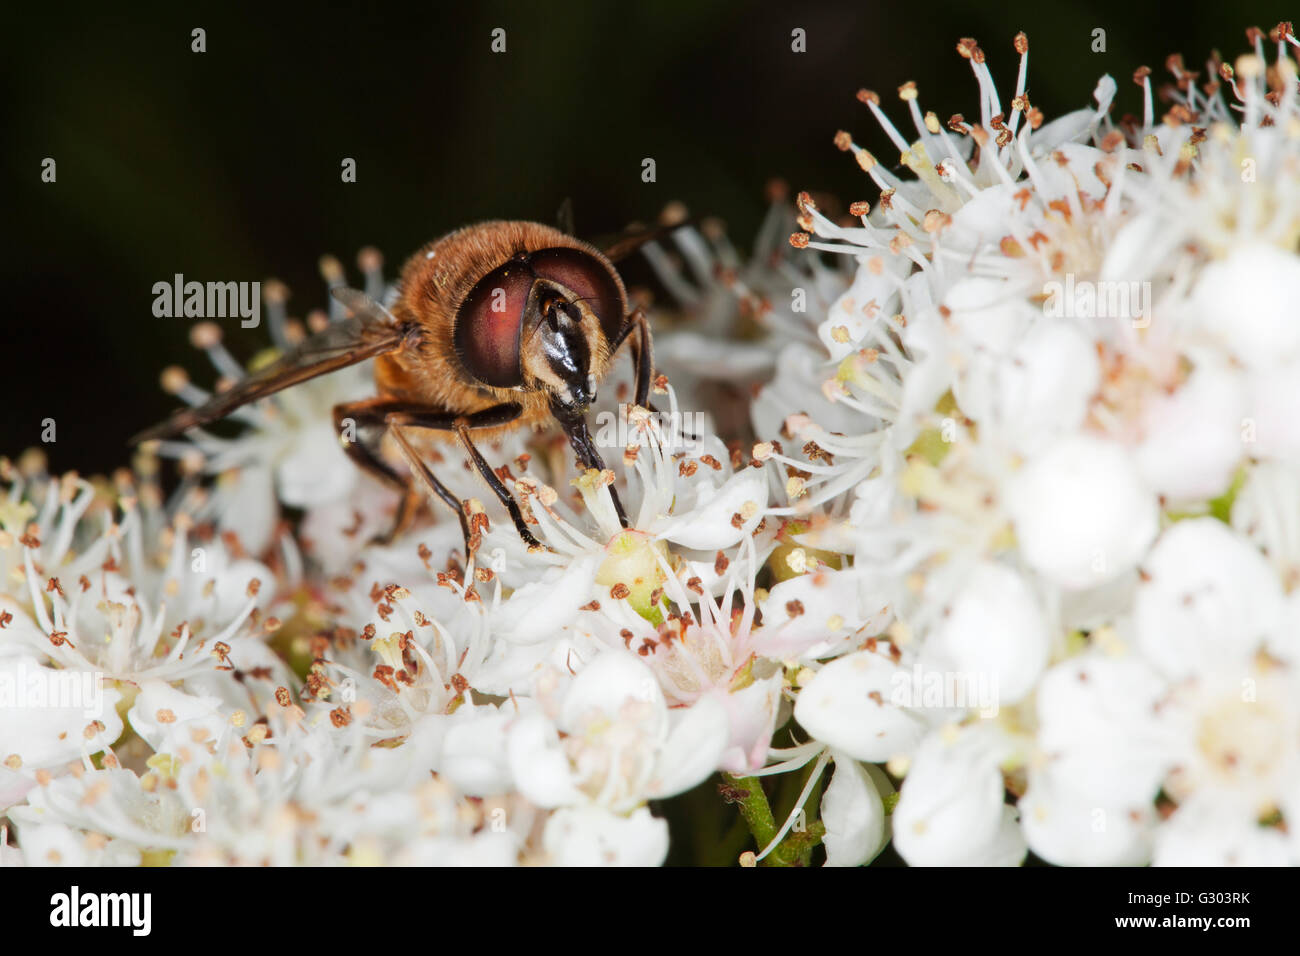 Drone fly (Eristalis tenax), collecting nectar, with proboscis in view Stock Photo